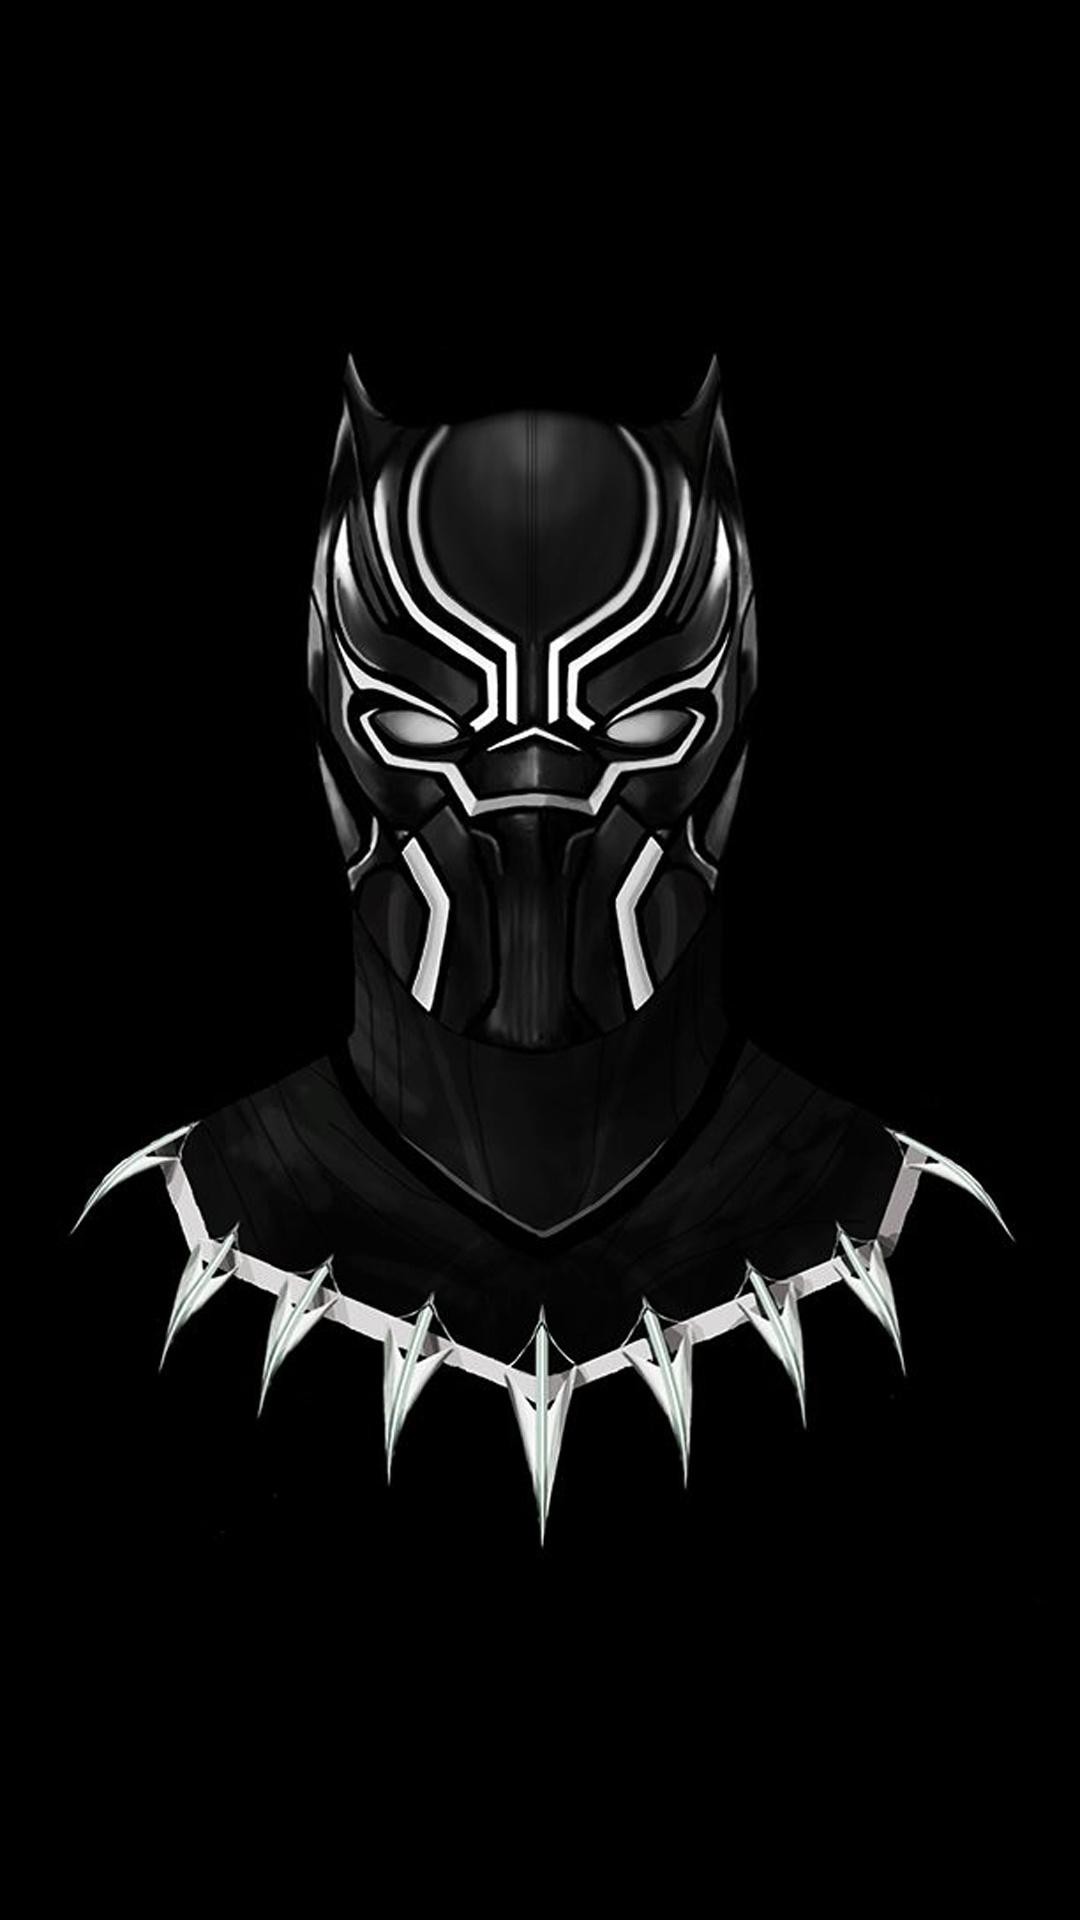 Black Panther HD Wallpapers For Android with high-resolution 1080x1920 pixel. You can use this wallpaper for your Android backgrounds, Tablet, Samsung Screensavers, Mobile Phone Lock Screen and another Smartphones device